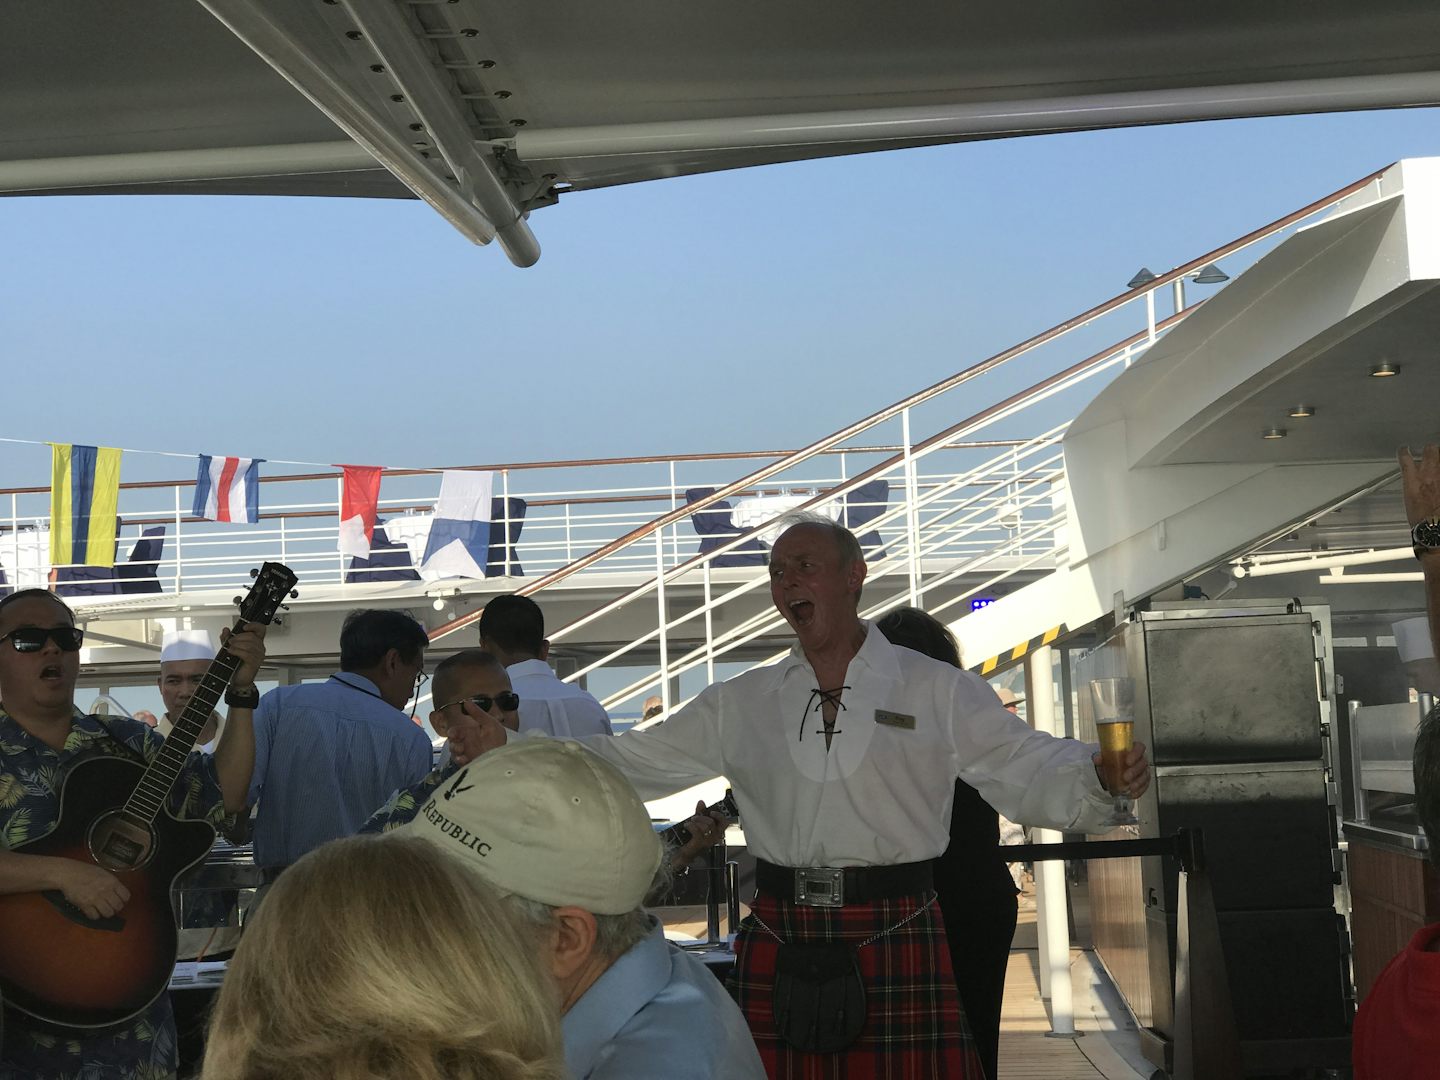 Our fabulous & talented Cruise Director, Ray Solaire, belting the tunes on BBQ night!